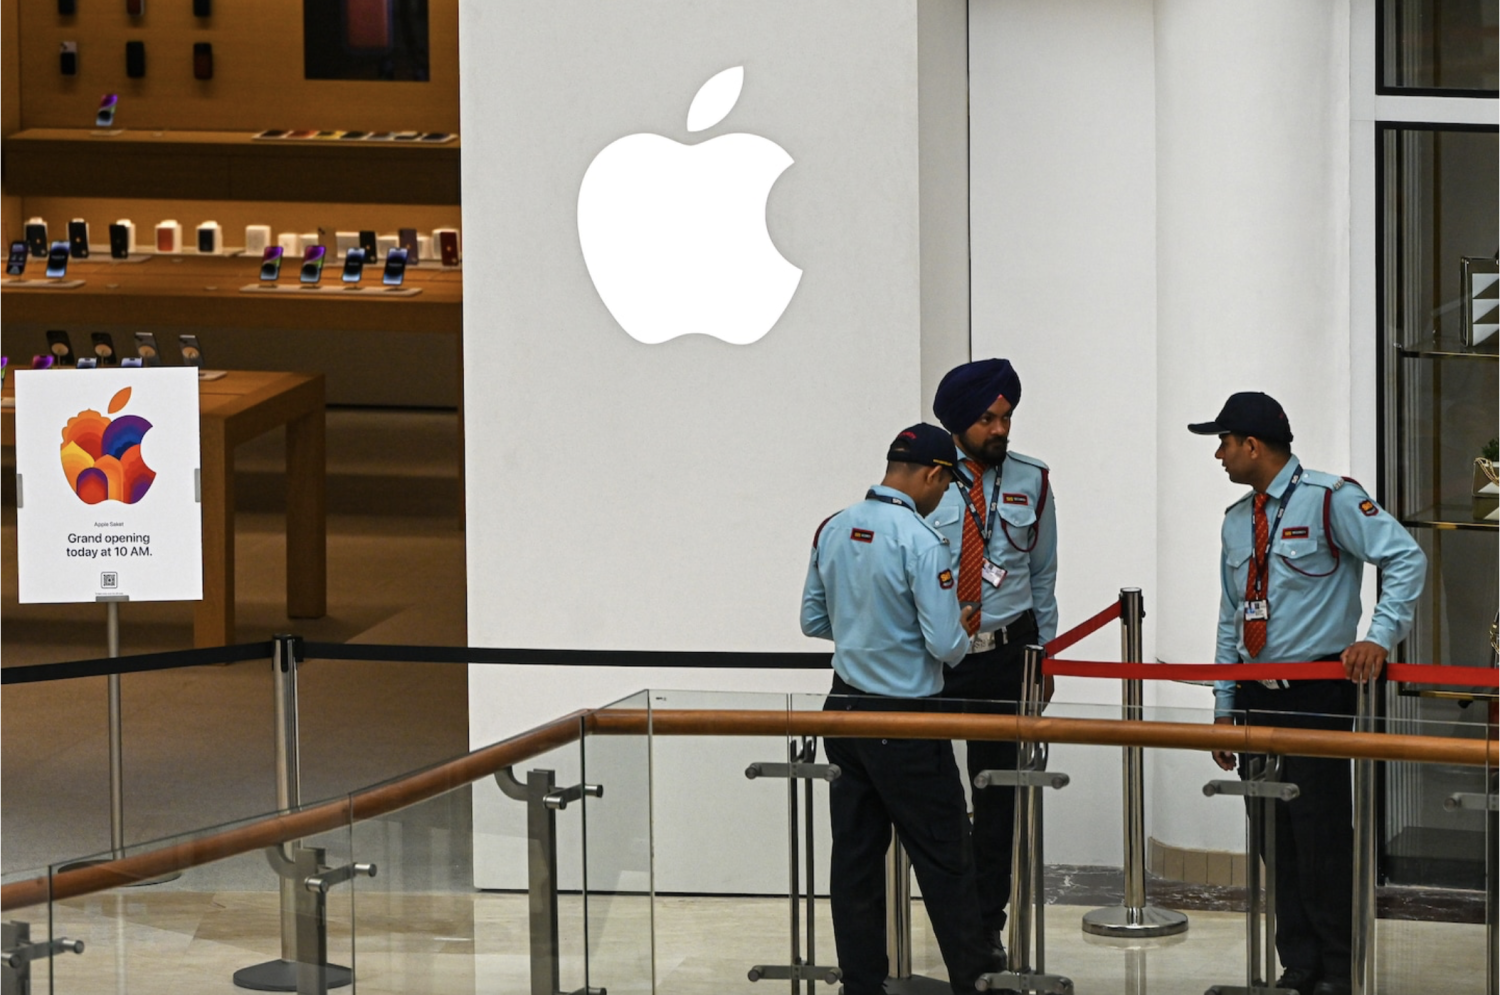 Security personnel prepare for the April opening of a new Apple store in New Delhi. As much as Apple sees growth in India, India has been courting Apple as part of a campaign to create factory jobs. (Prakash Singh/Bloomberg News/Getty Images)